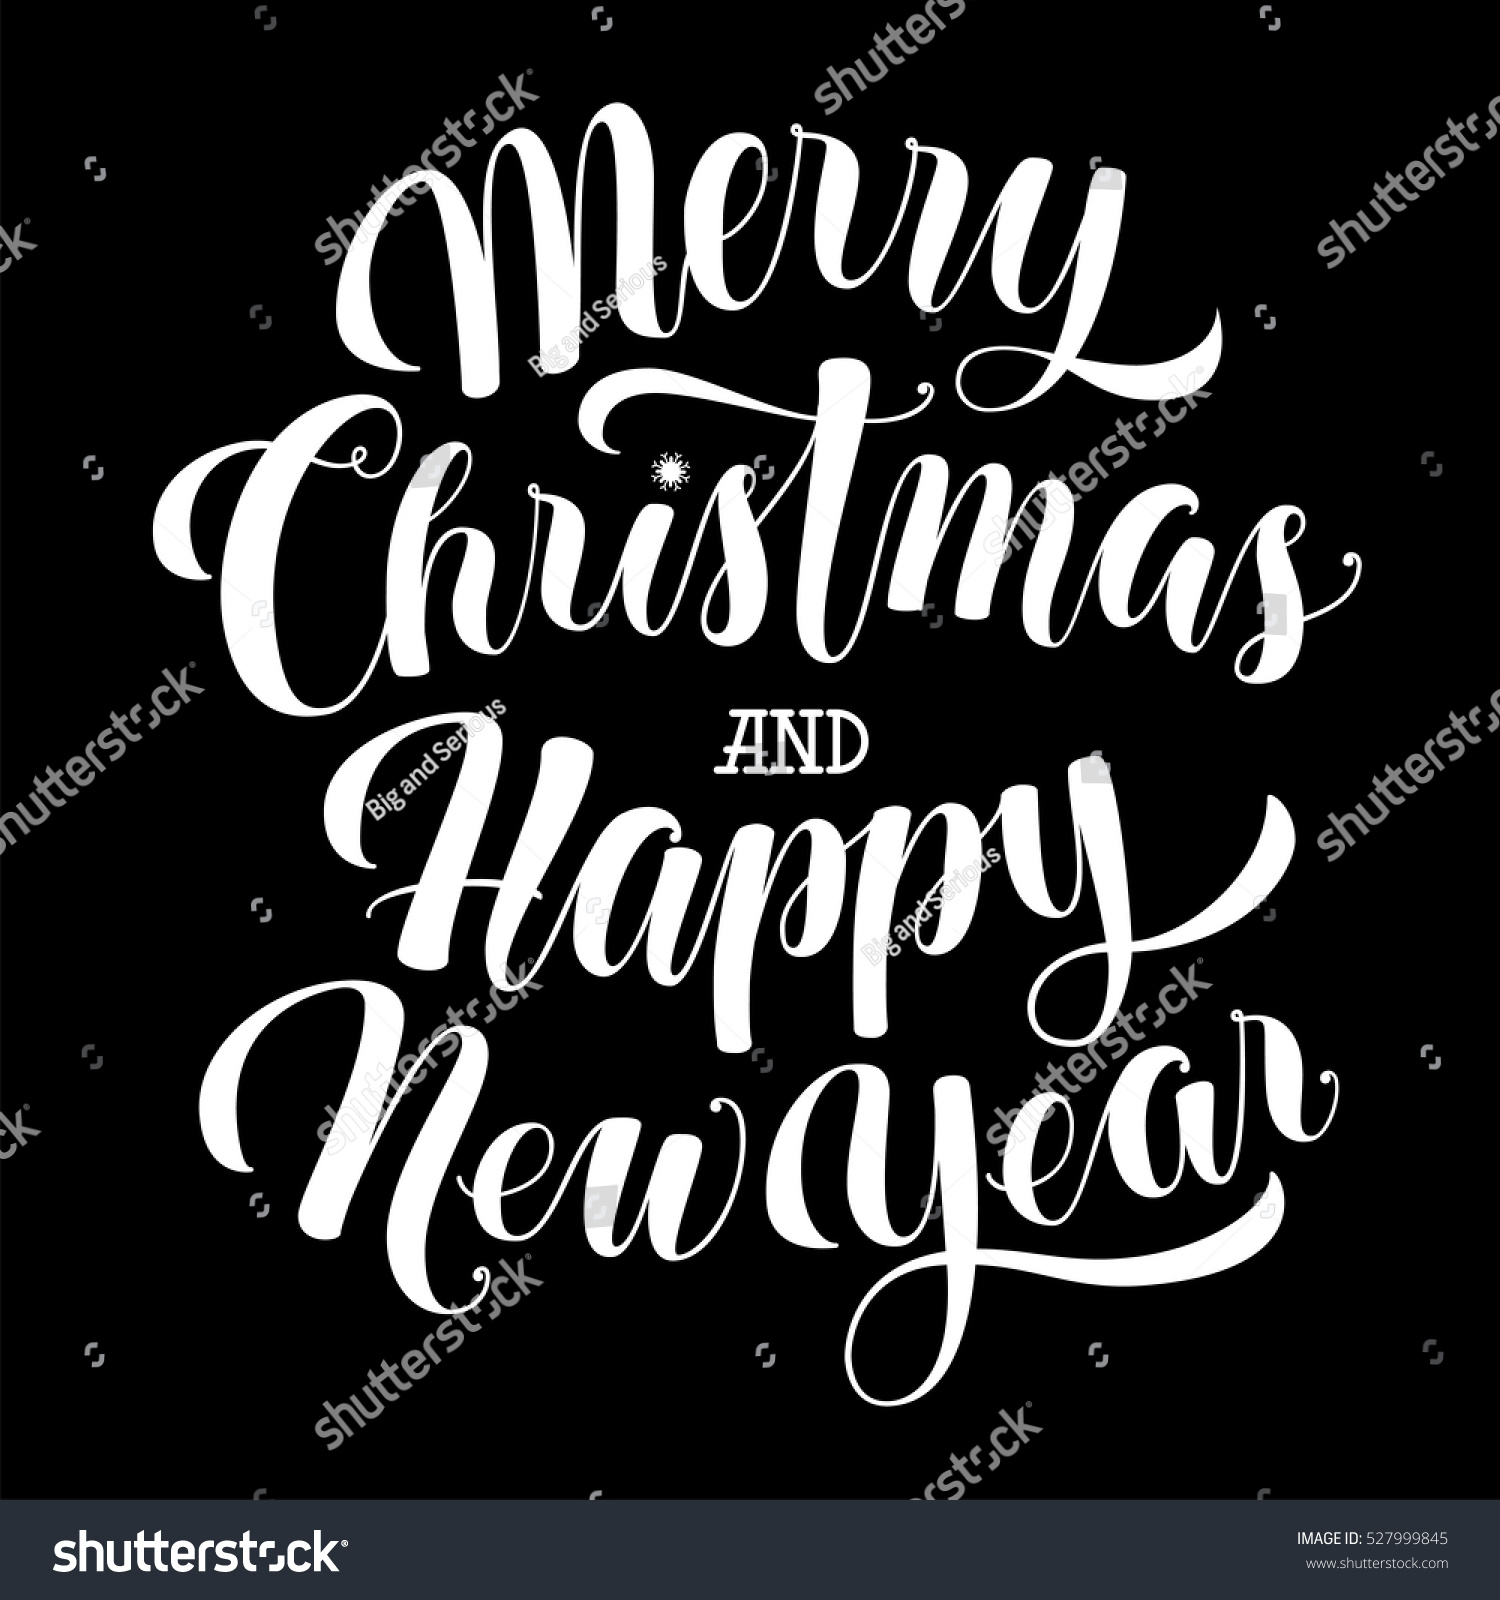 Merry Christmas and a happy new year Handmade typographic lettering Calligraphic Vector Sketch